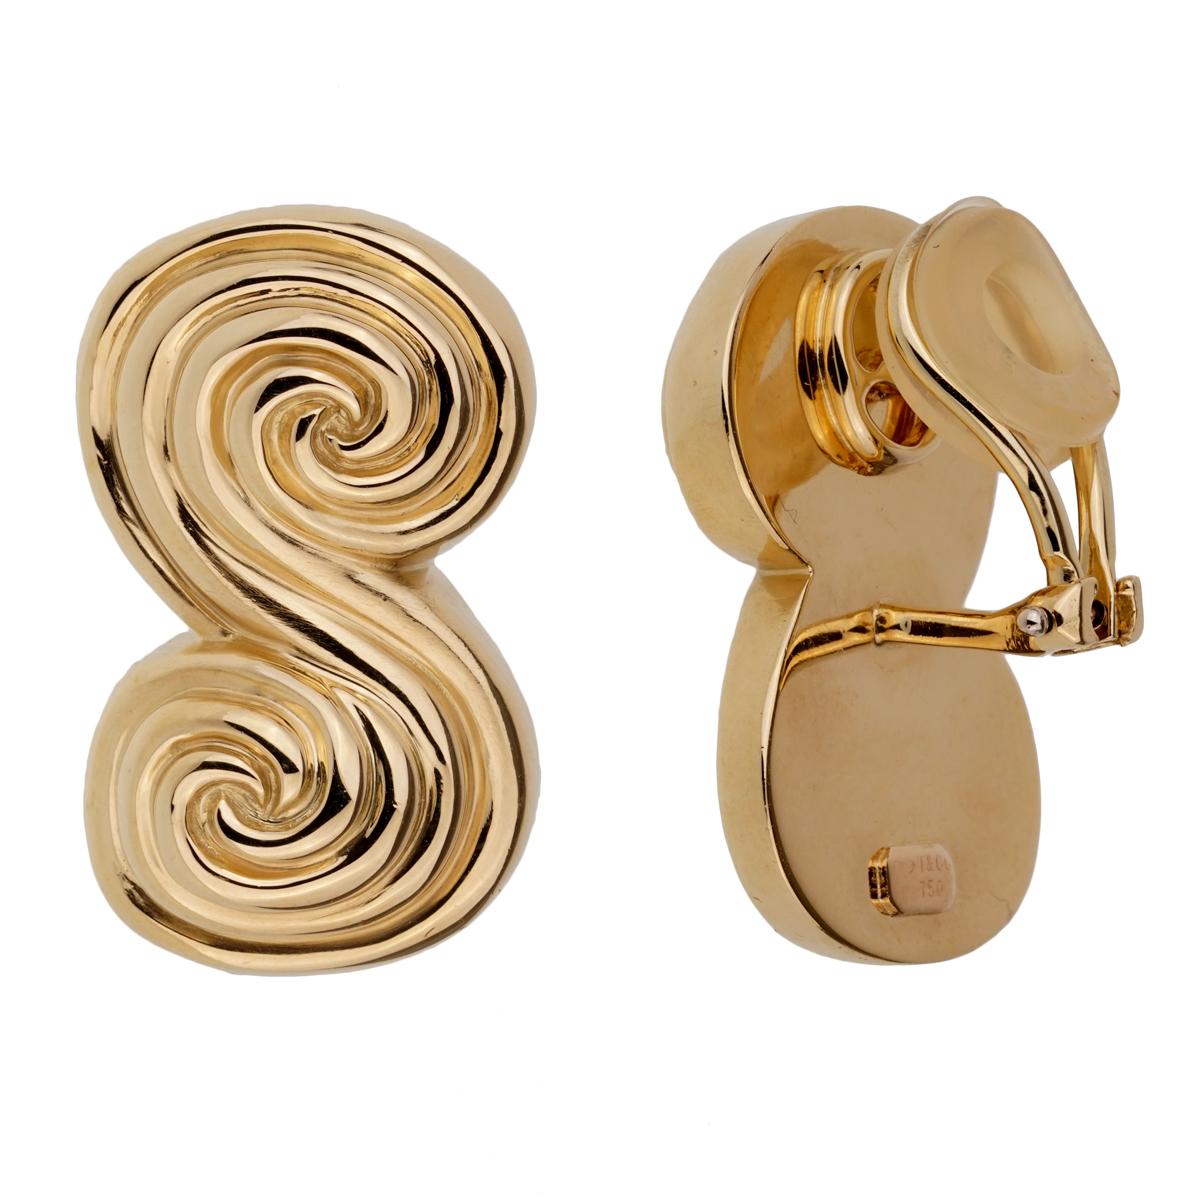 A chic pair of Tiffany & Co earrings featuring a scroll motif in 18k yellow gold. The earrings are circa 1995. The earrings measures .59